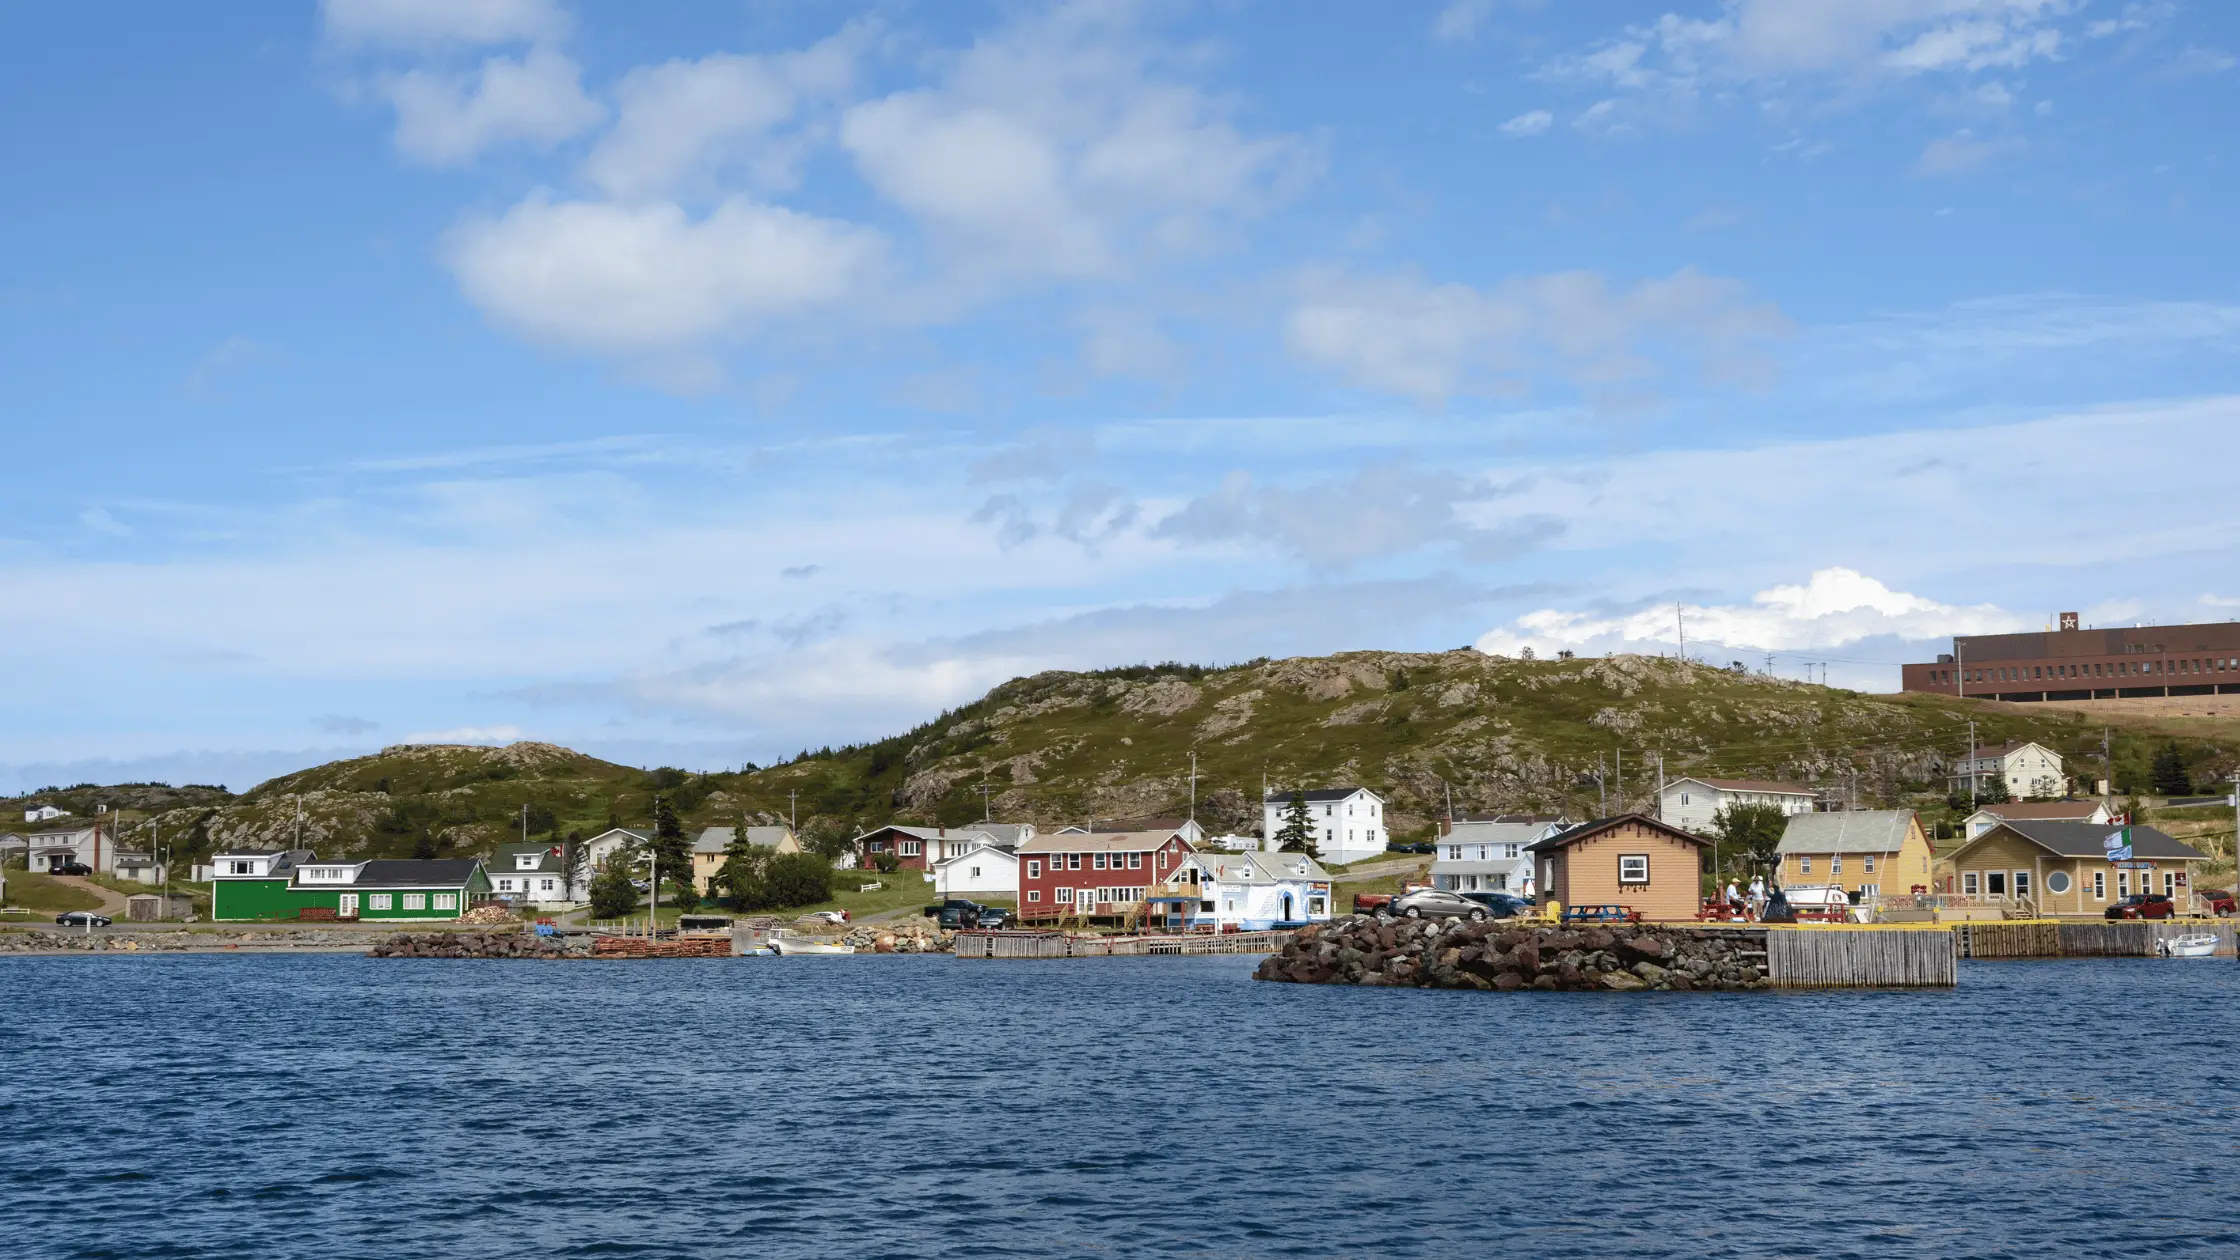 Town of Twillingate - Newfoundland and Labrador